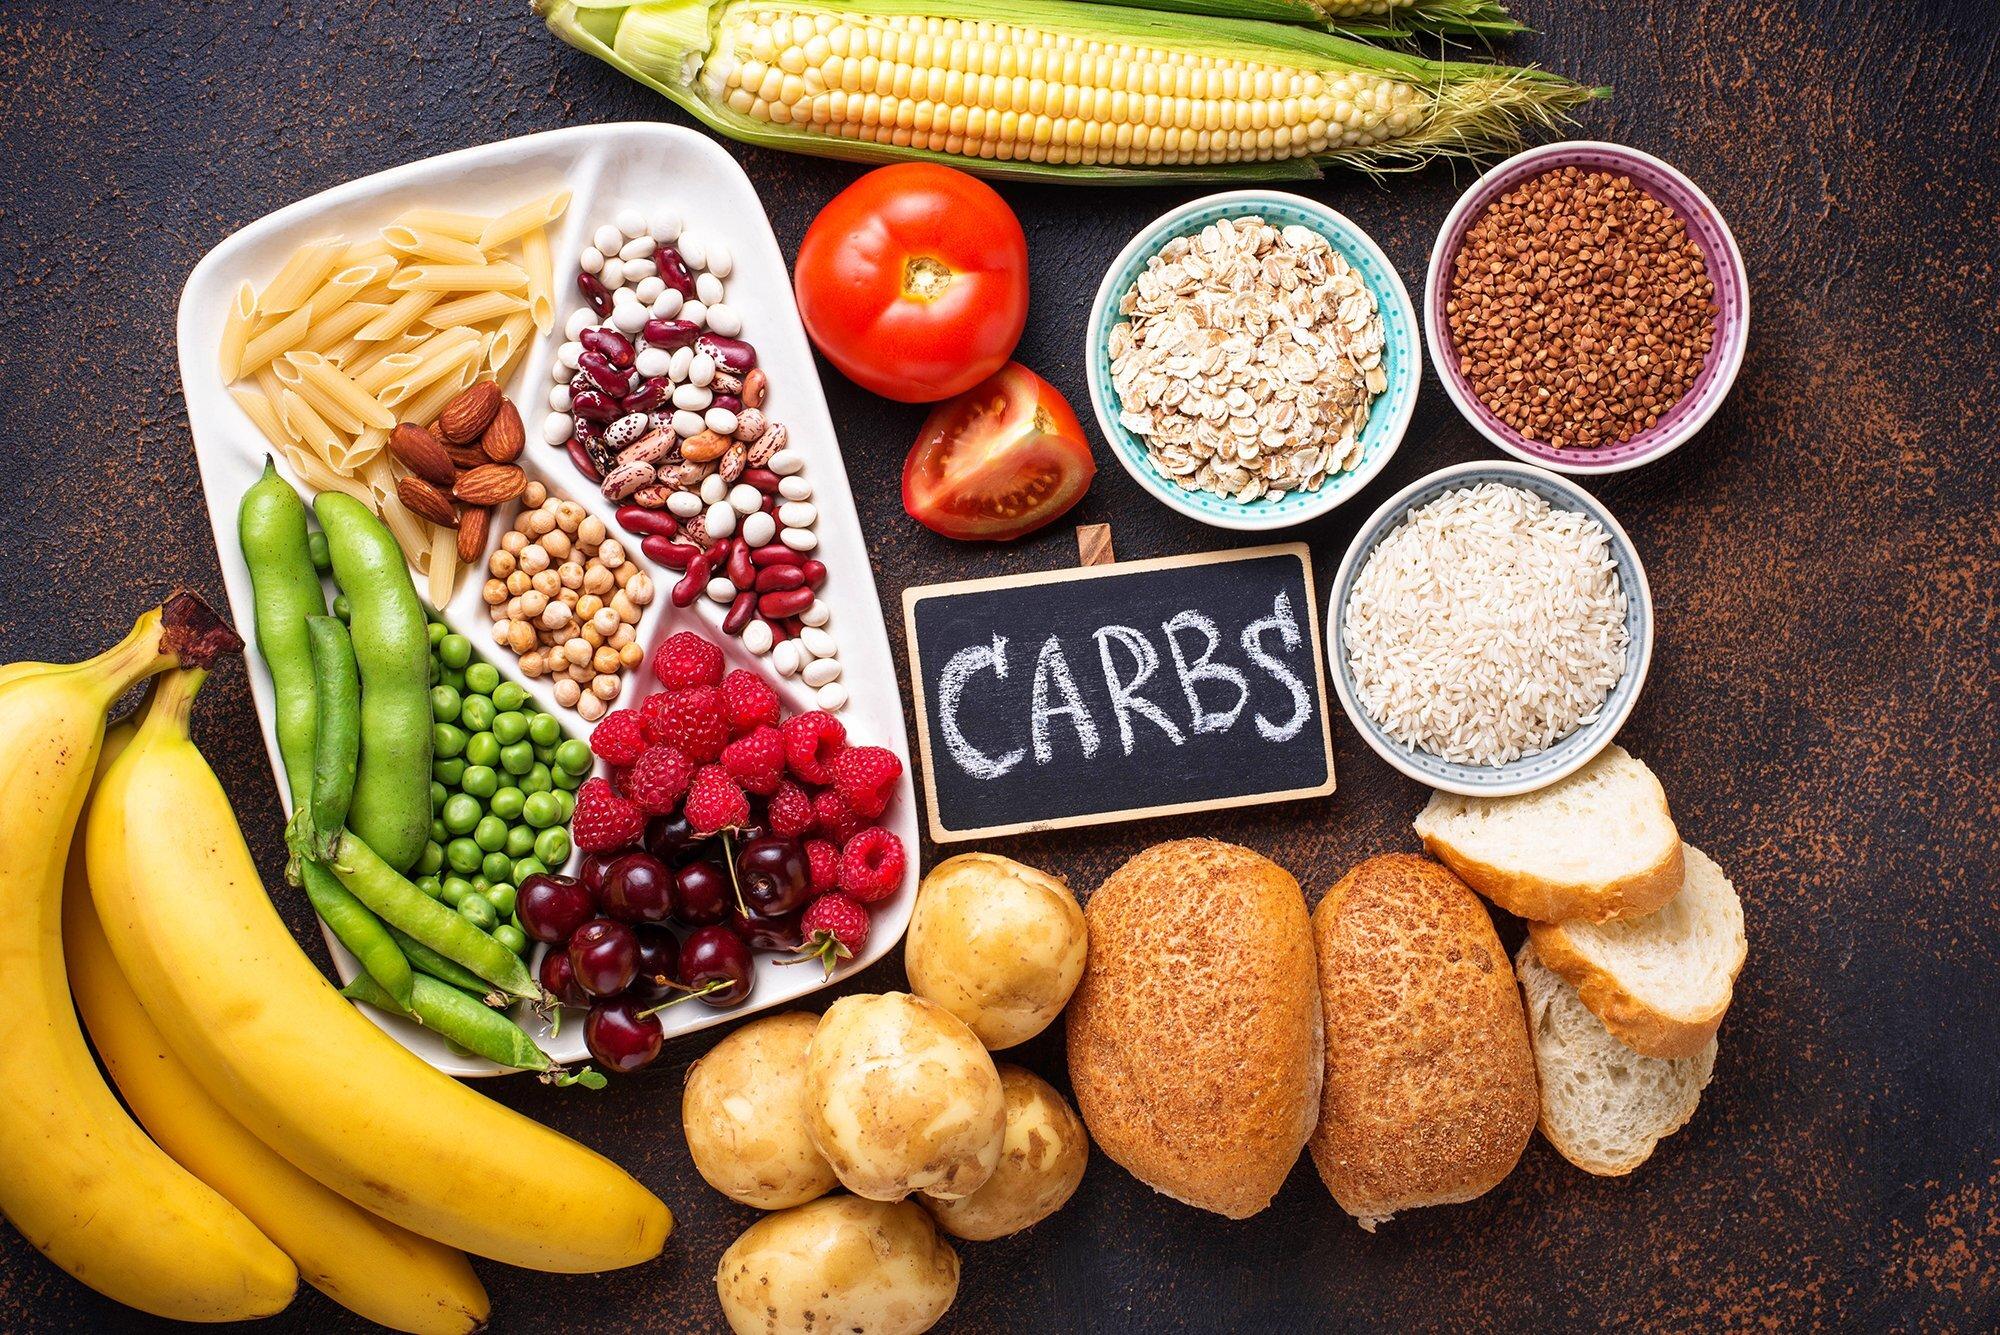 9. Know Which Carbs to Target